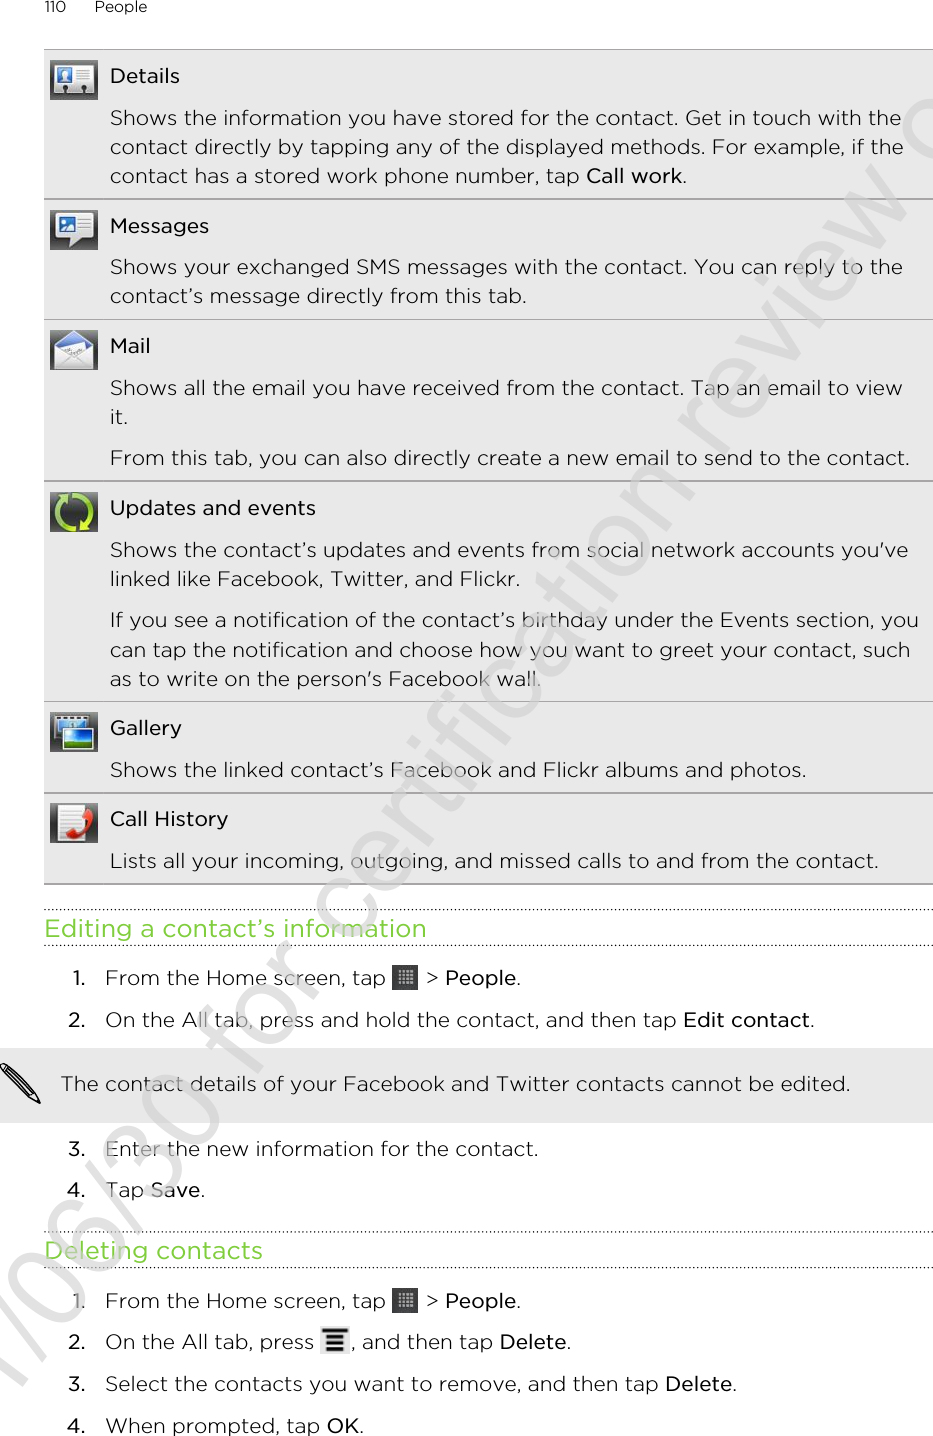 DetailsShows the information you have stored for the contact. Get in touch with thecontact directly by tapping any of the displayed methods. For example, if thecontact has a stored work phone number, tap Call work.MessagesShows your exchanged SMS messages with the contact. You can reply to thecontact’s message directly from this tab.MailShows all the email you have received from the contact. Tap an email to viewit.From this tab, you can also directly create a new email to send to the contact.Updates and eventsShows the contact’s updates and events from social network accounts you&apos;velinked like Facebook, Twitter, and Flickr.If you see a notification of the contact’s birthday under the Events section, youcan tap the notification and choose how you want to greet your contact, suchas to write on the person&apos;s Facebook wall.GalleryShows the linked contact’s Facebook and Flickr albums and photos.Call HistoryLists all your incoming, outgoing, and missed calls to and from the contact.Editing a contact’s information1. From the Home screen, tap   &gt; People.2. On the All tab, press and hold the contact, and then tap Edit contact. The contact details of your Facebook and Twitter contacts cannot be edited.3. Enter the new information for the contact.4. Tap Save.Deleting contacts1. From the Home screen, tap   &gt; People.2. On the All tab, press  , and then tap Delete.3. Select the contacts you want to remove, and then tap Delete.4. When prompted, tap OK.110 People2011/06/30 for certification review only